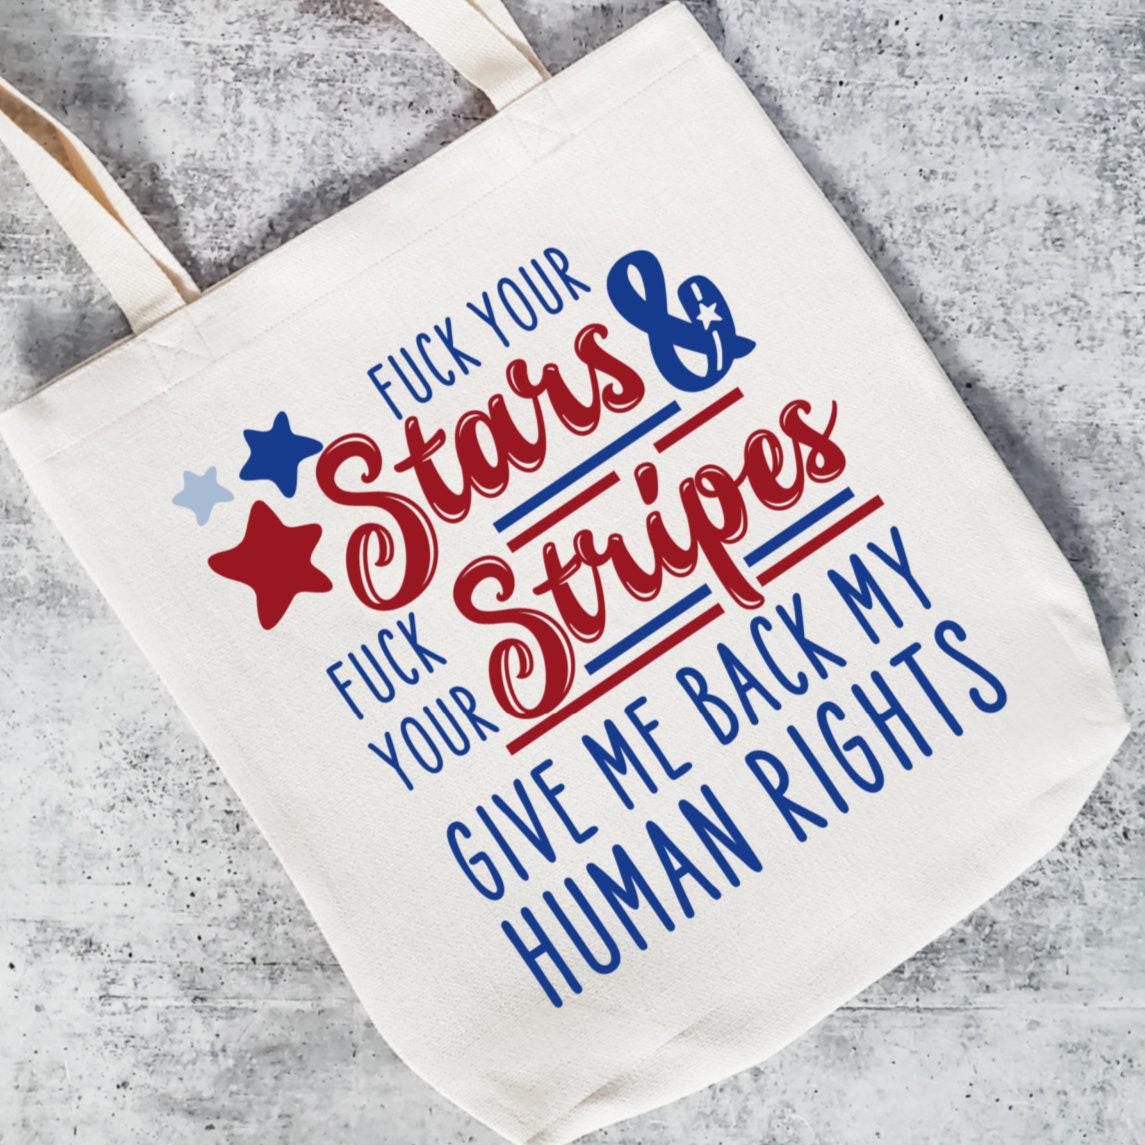 Pro Choice Fourth of July Tote Bag - Abortion Rights Book Bag for College Student - Political Statement Feminist Grocery Bag for Anti July 4